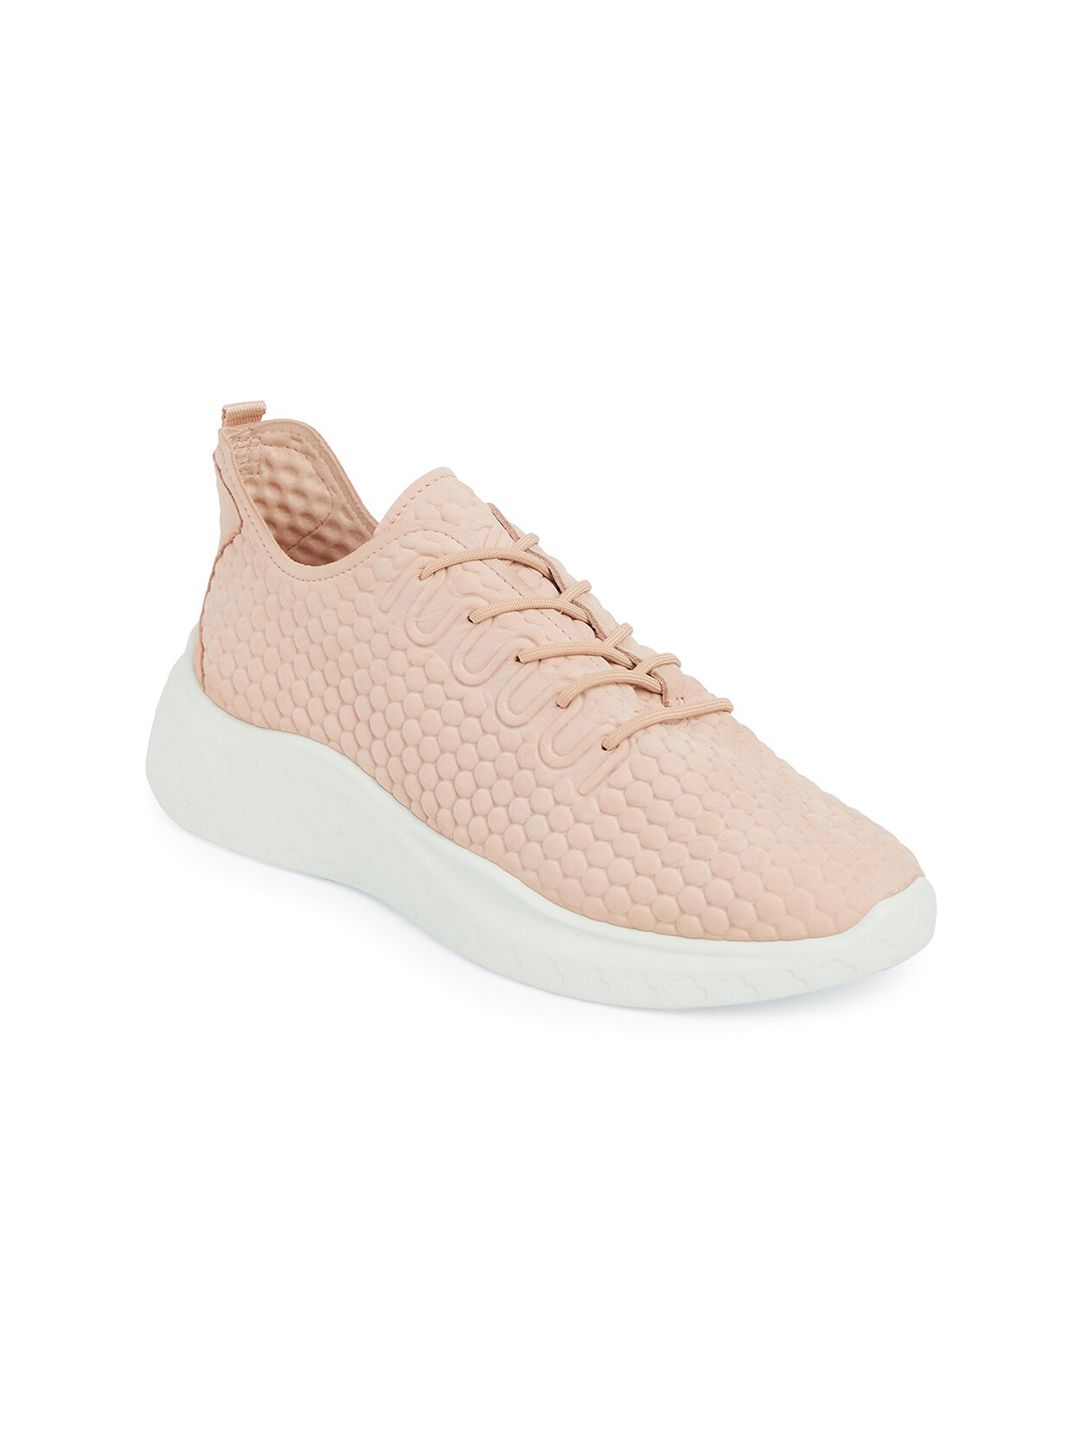 ECCO Women Pink Athleisure Leather Walking Non-Marking Shoes Price in India